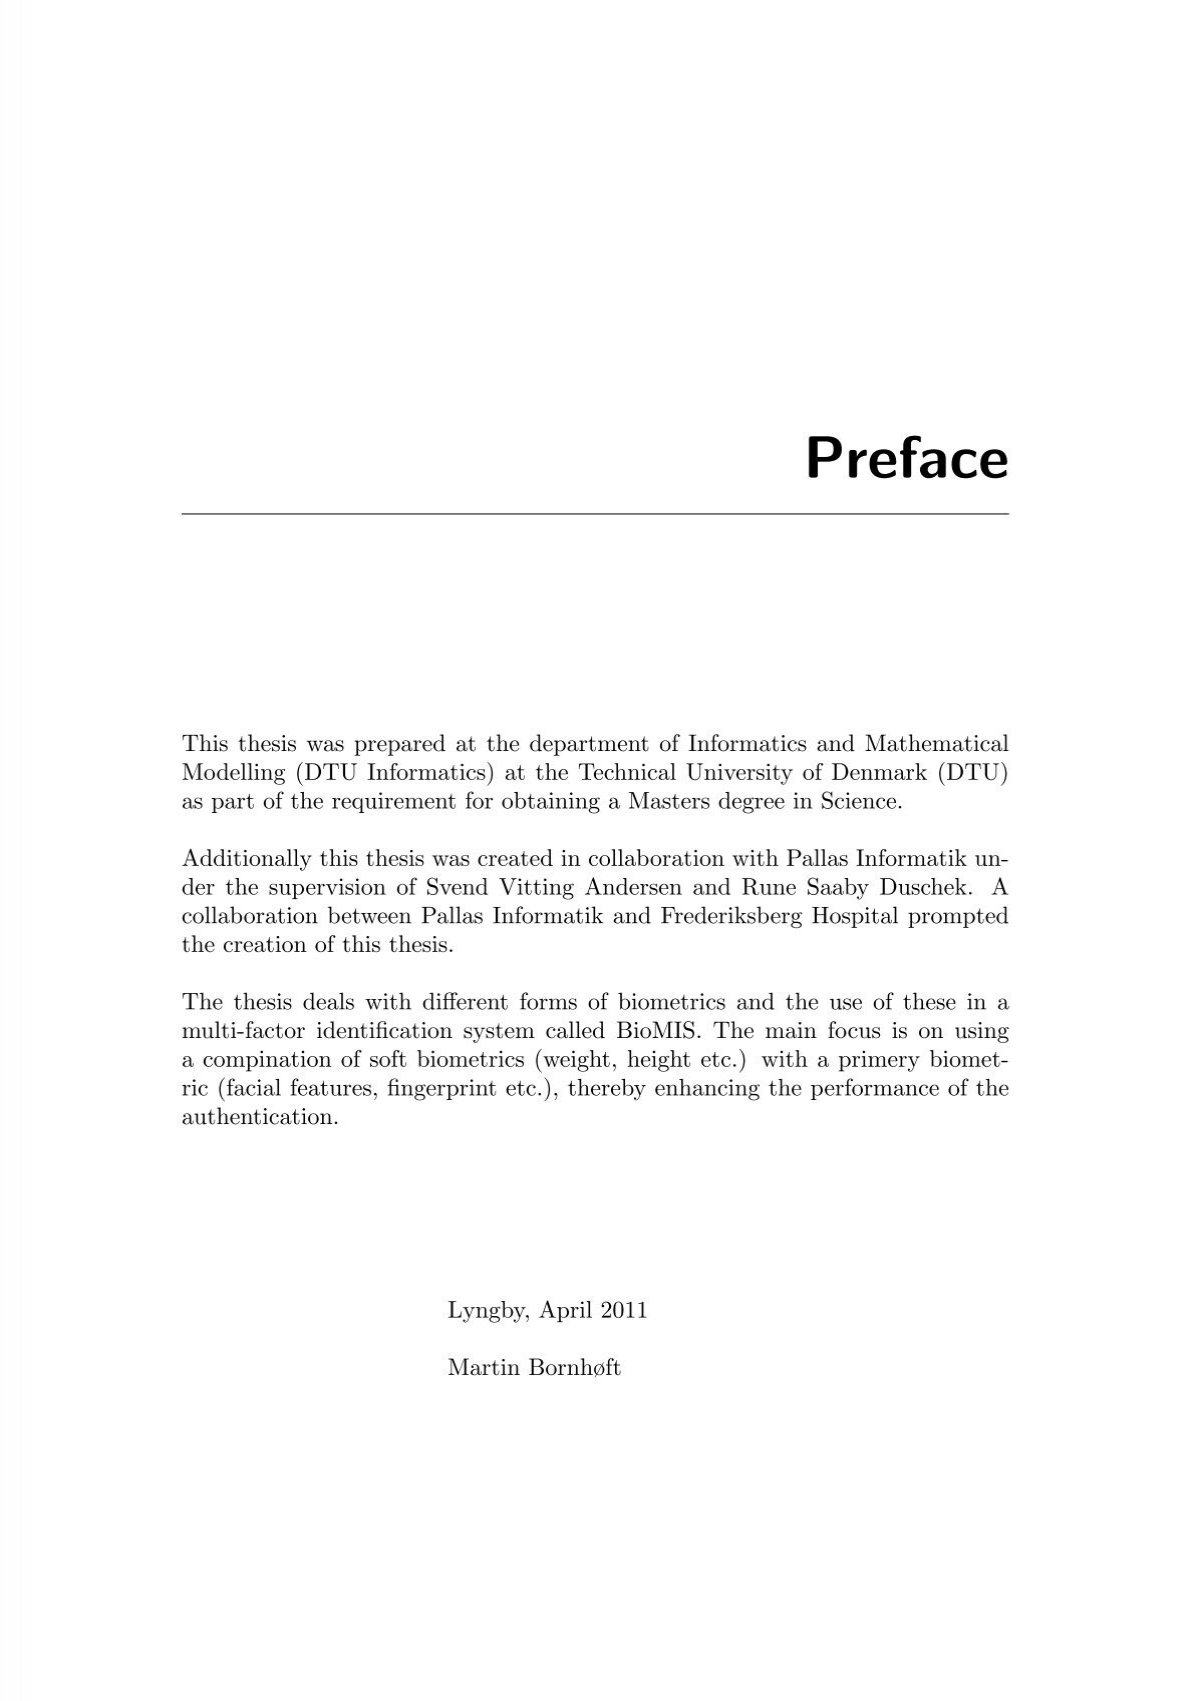 preface of phd thesis